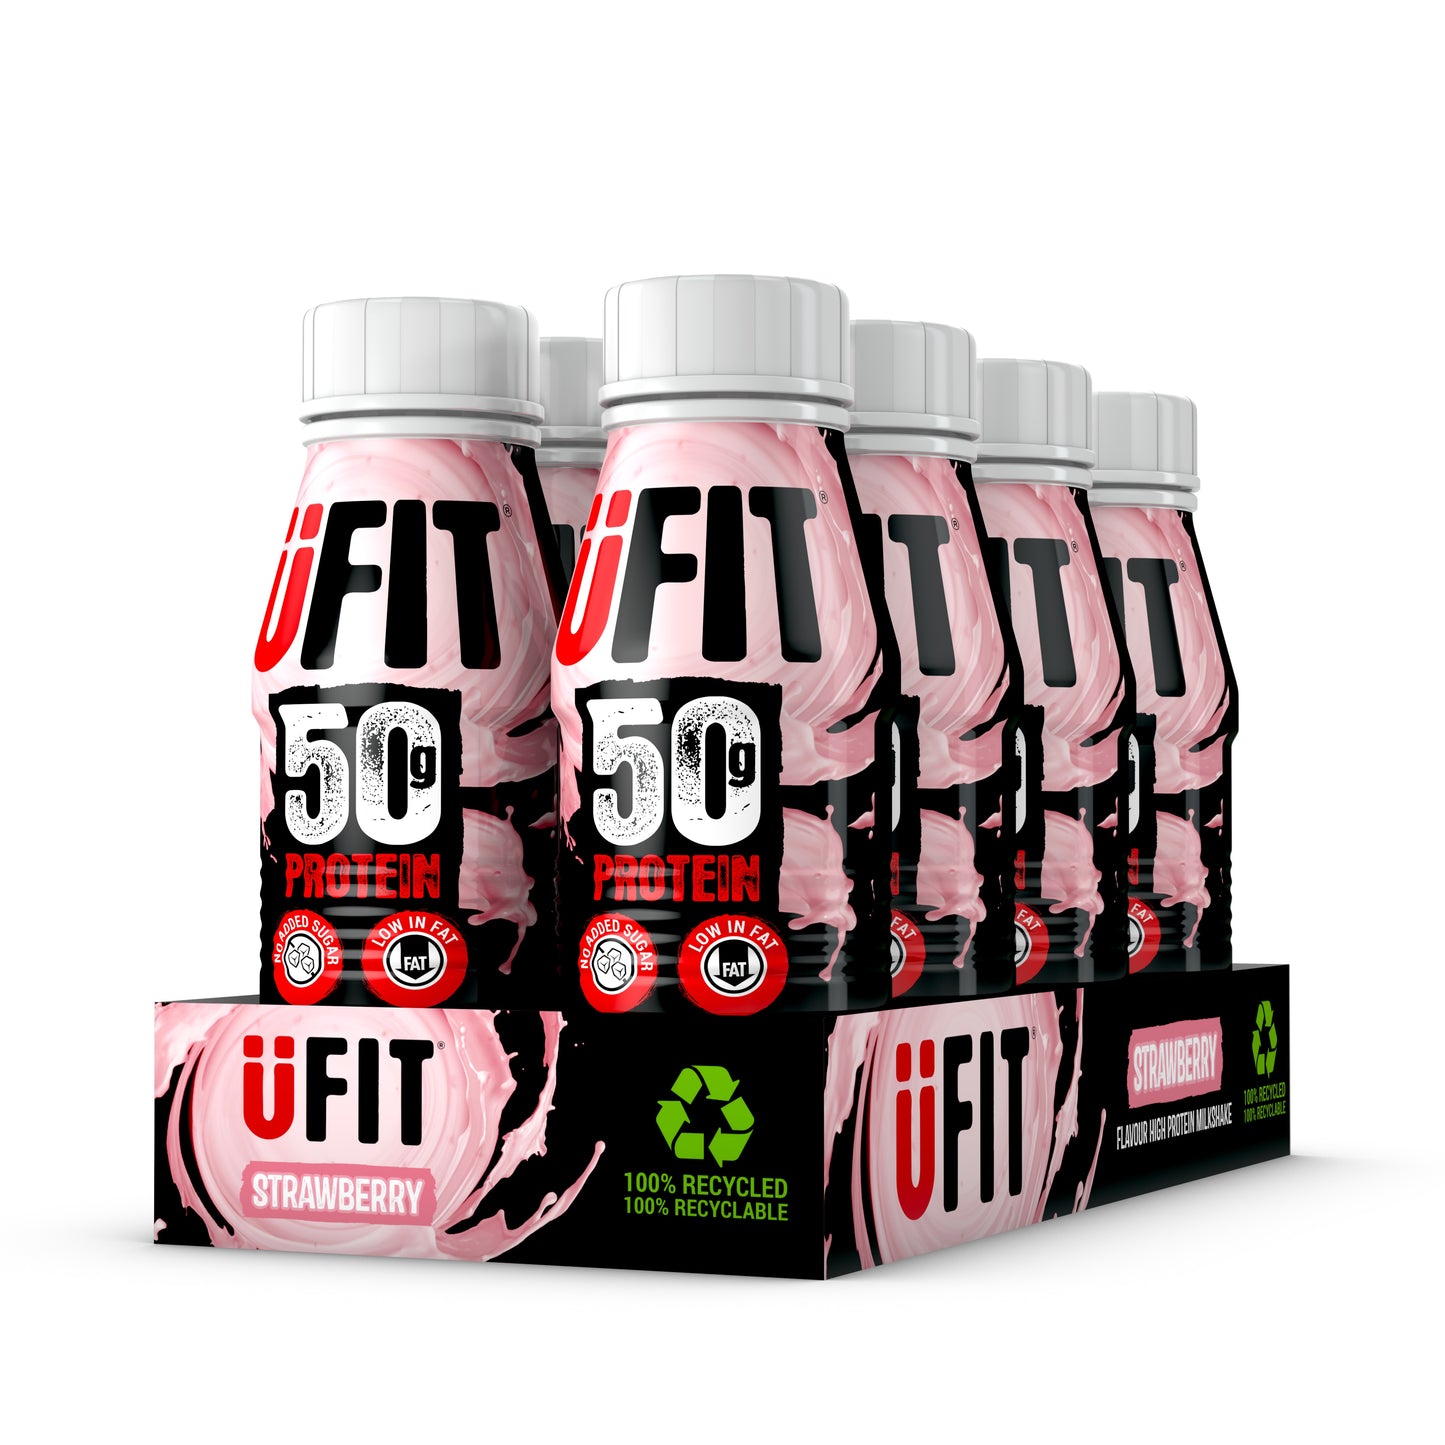 UFIT 50G PROTEIN - 3 CASES OF 8 FOR £45 (PACKS MAY VARY)